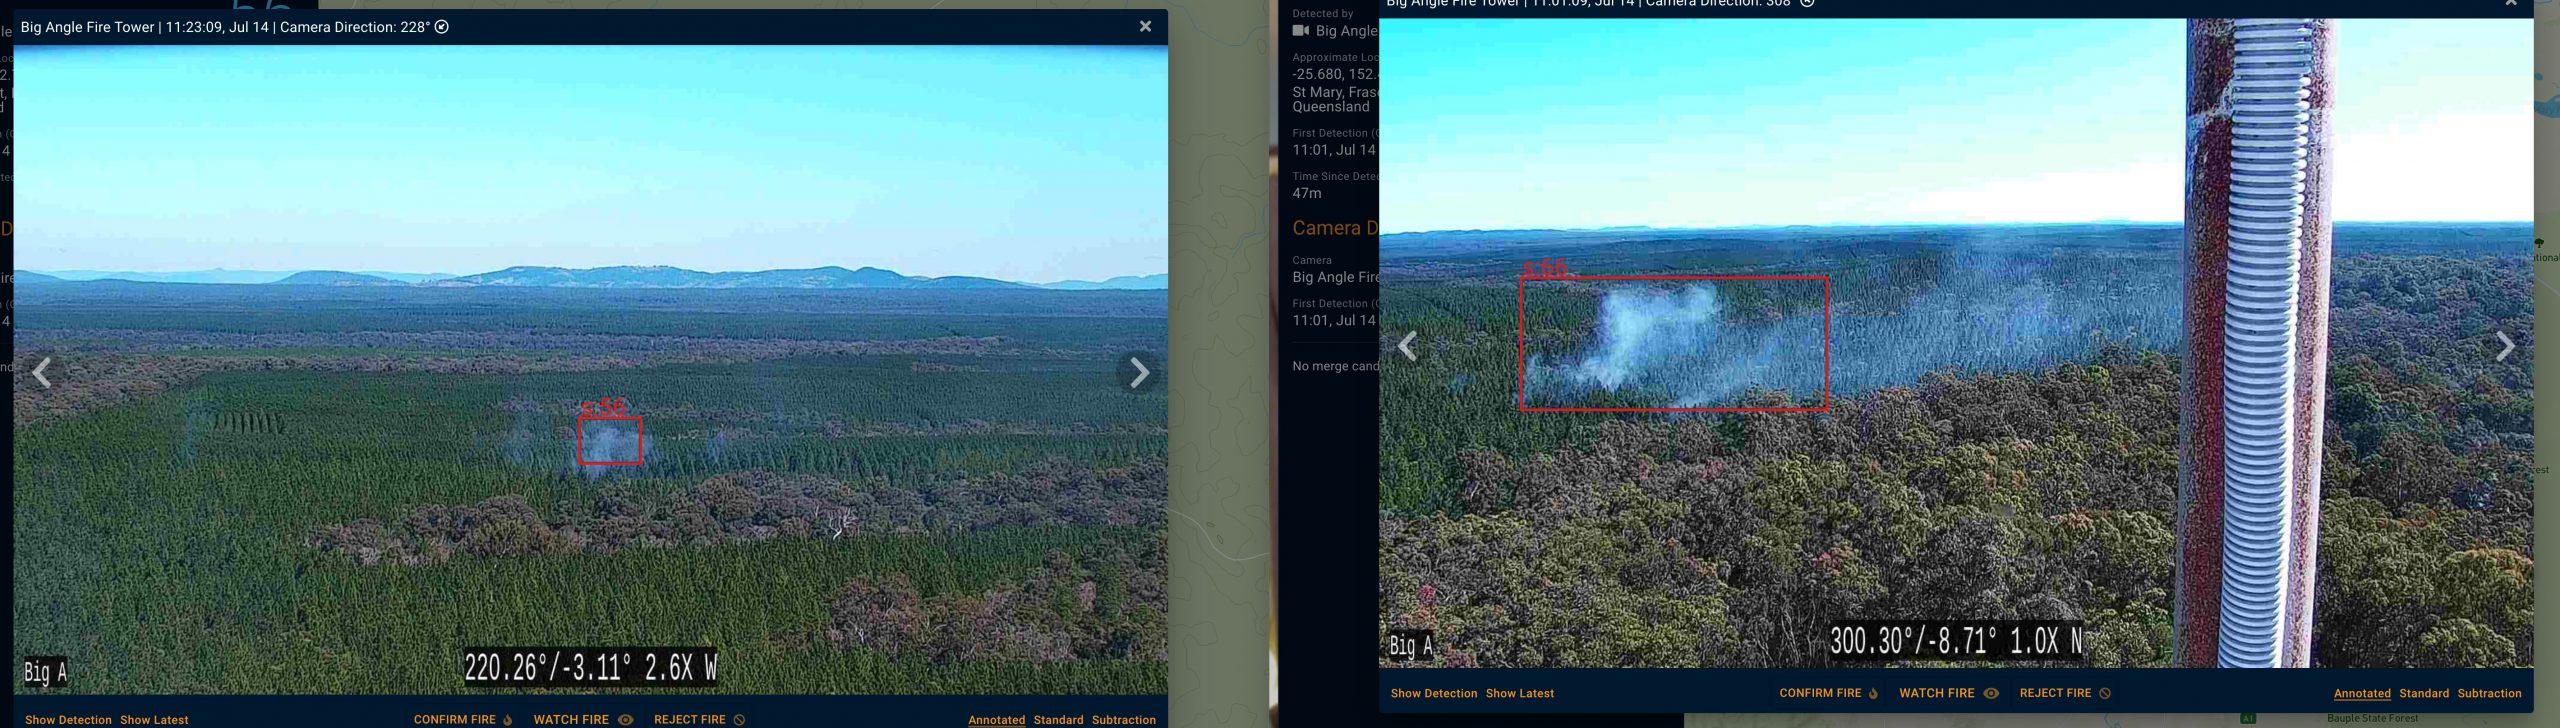 exci's artificial intelligence detects fires in camera images from Alberta Marten Mountain